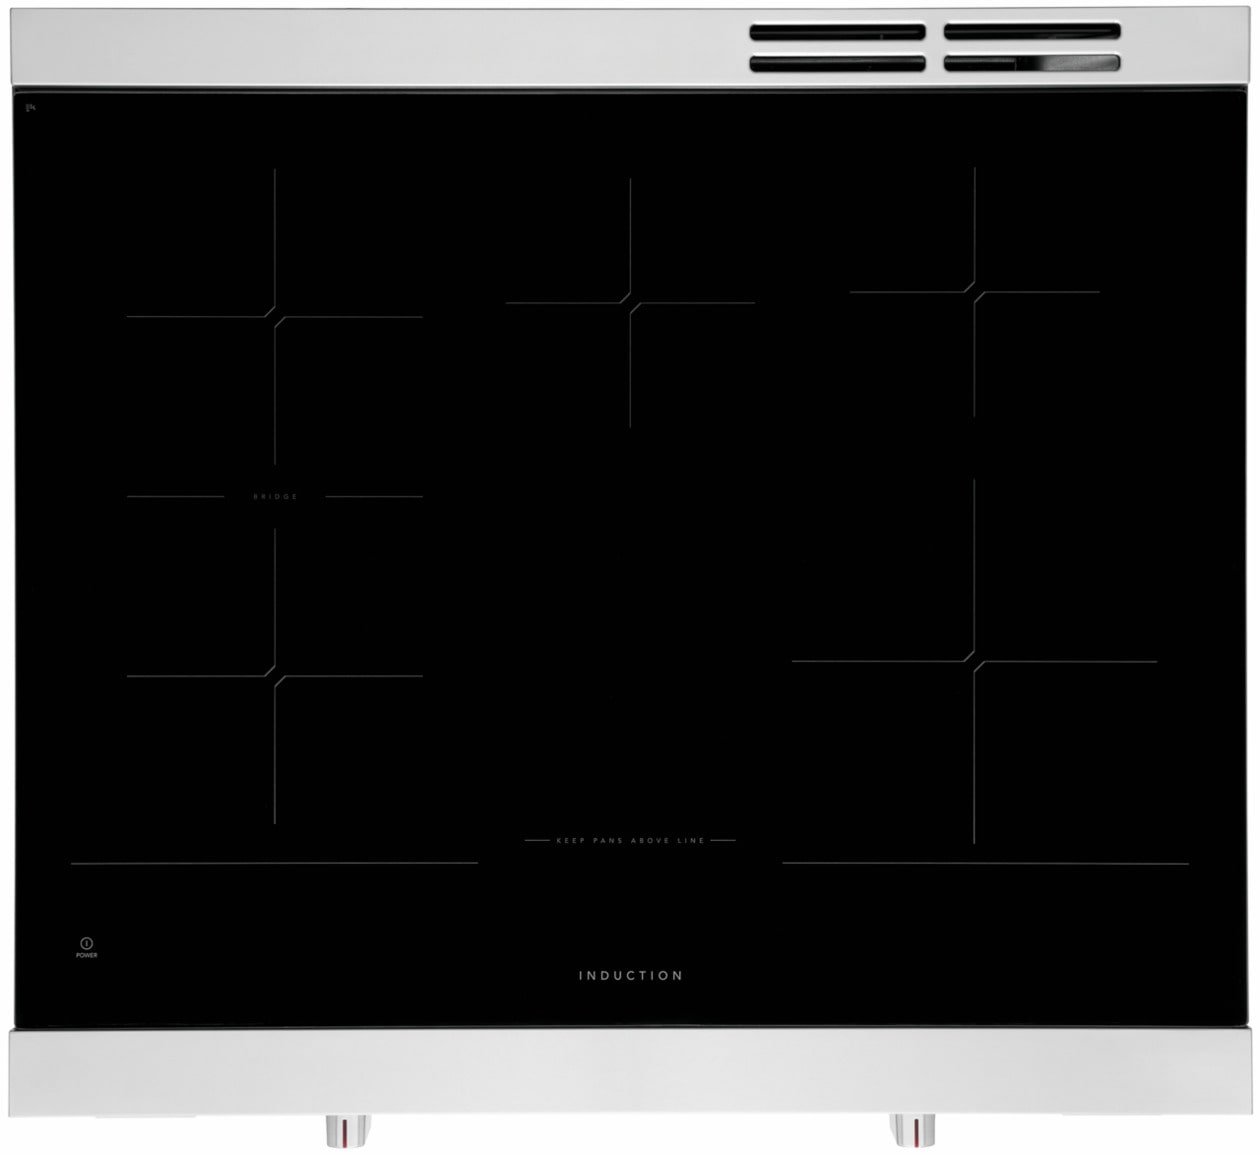 Frigidaire Professional 30" Induction Range with Total Convection